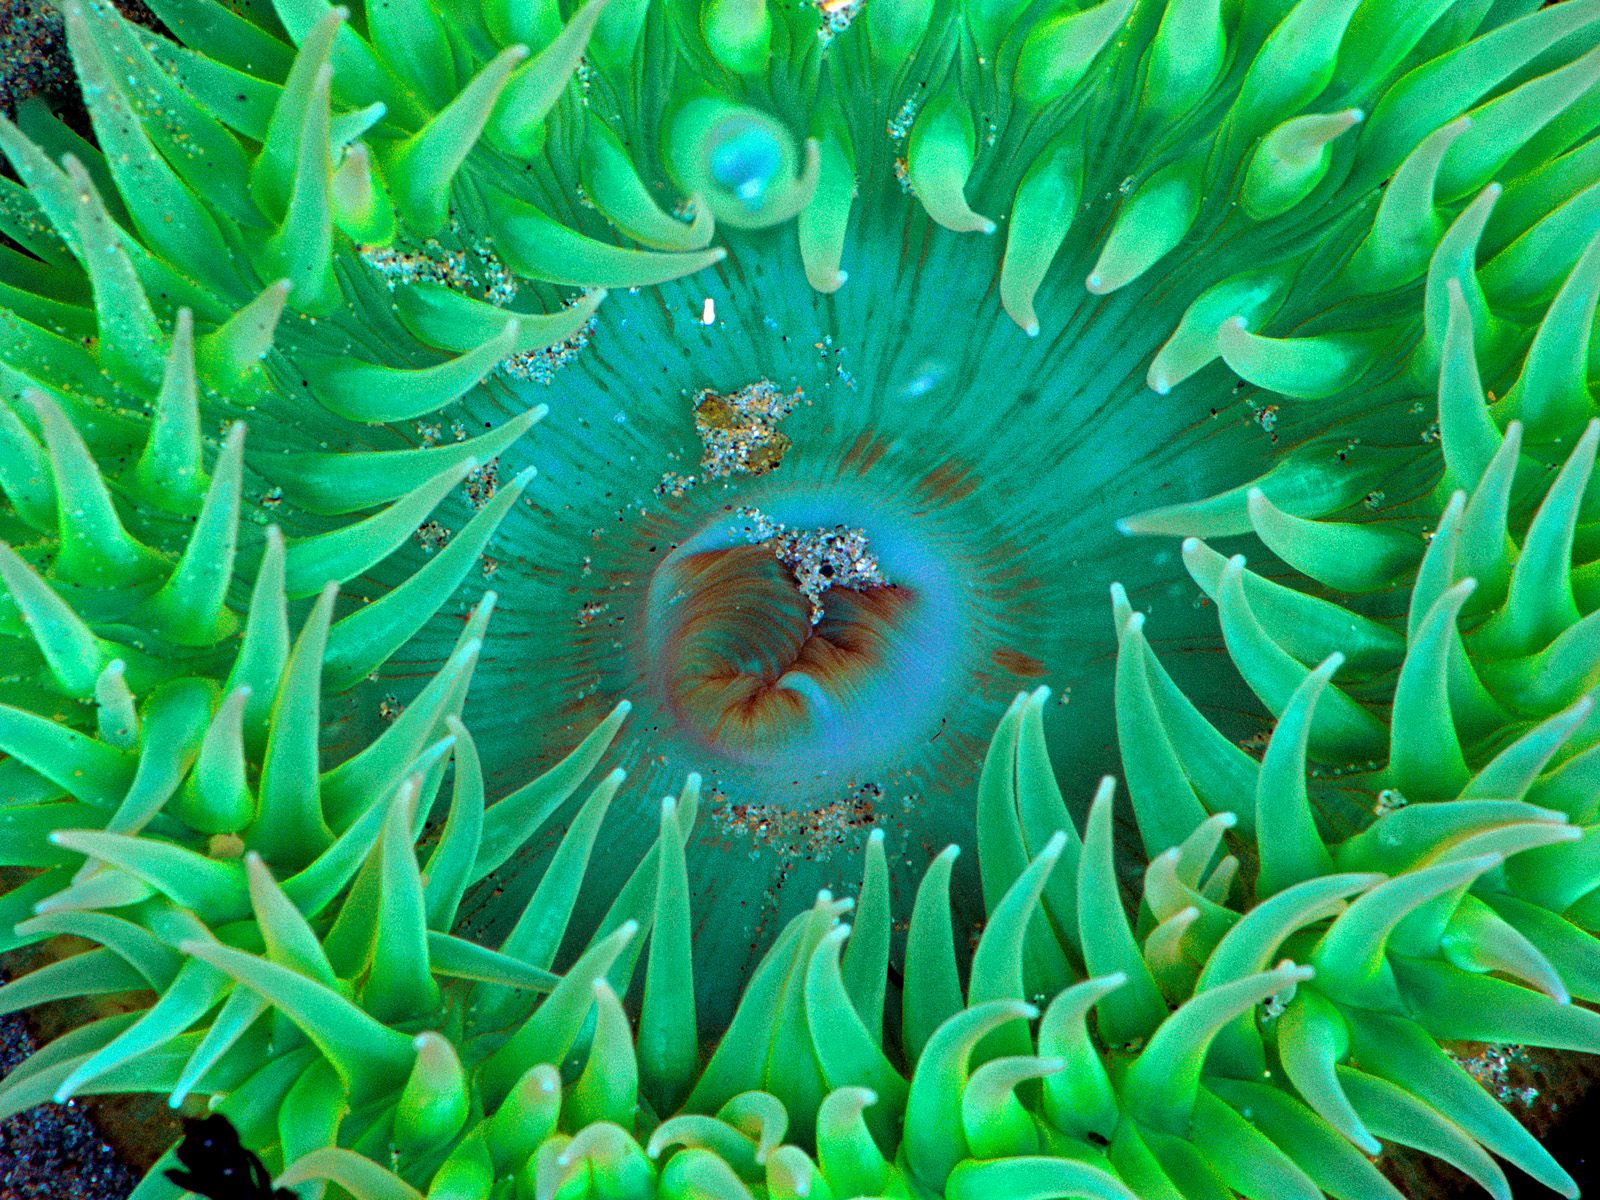 Sea anemone wallpapers and images - wallpapers, pictures, photos